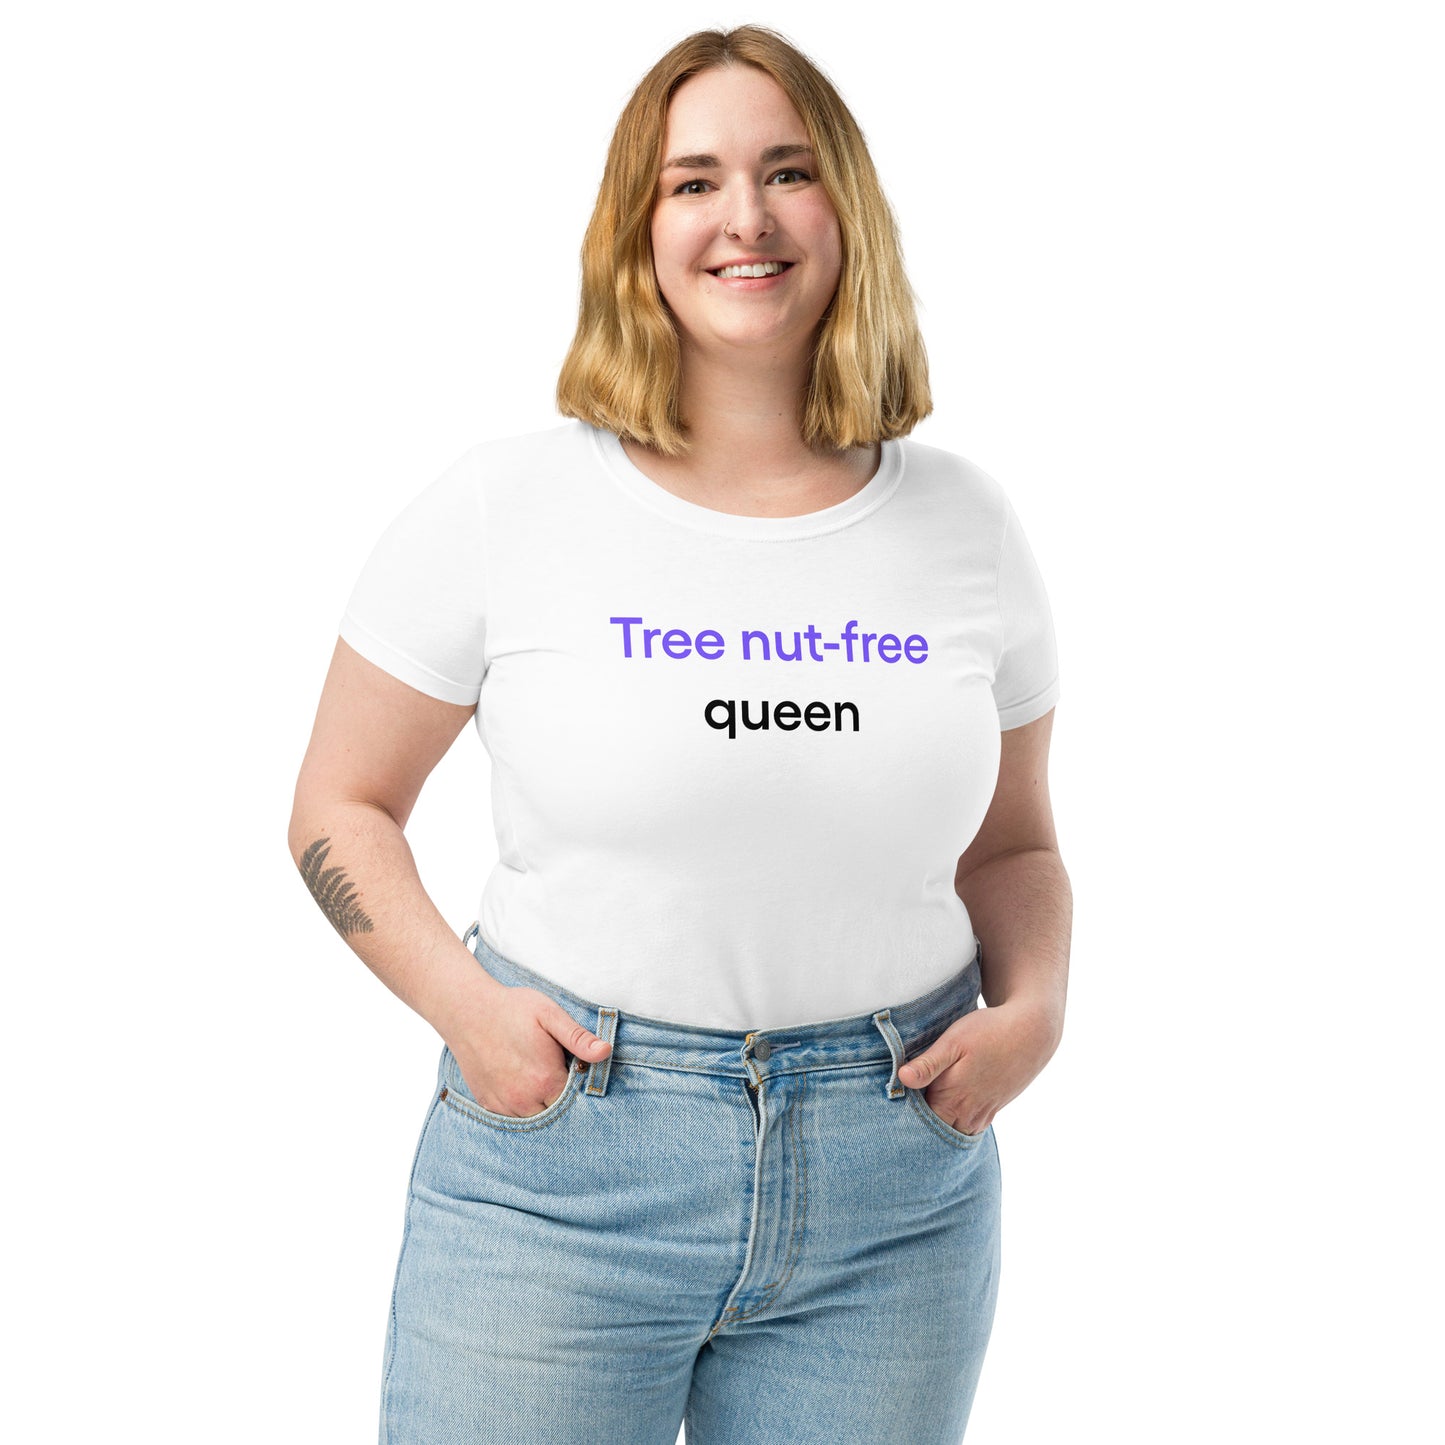 Tree nut-free queen | Women’s fitted t-shirt